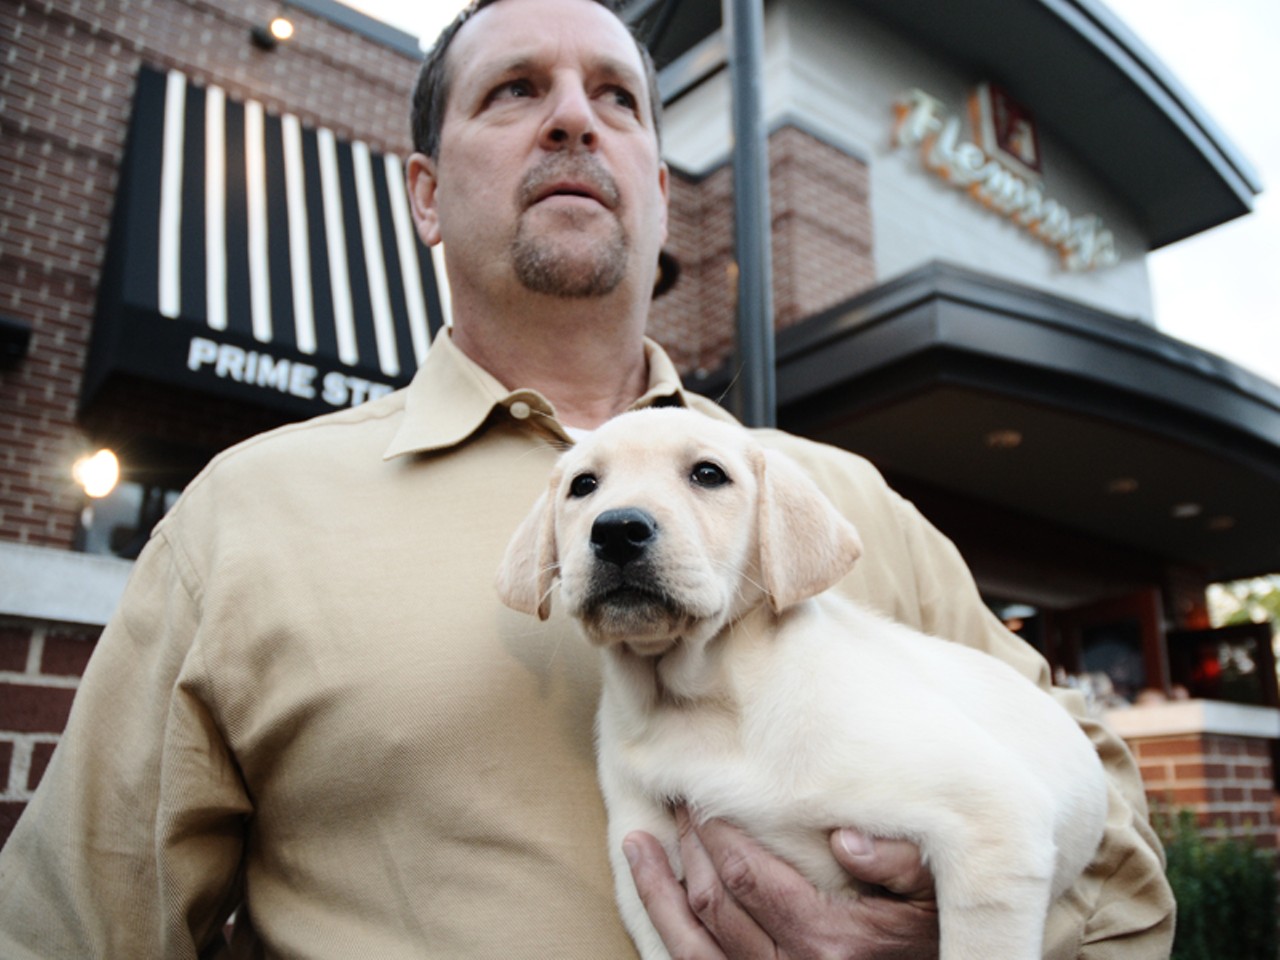 Despite a passing resemblance, this is not Rams head coach Steve Spagnuolo holding an adorable puppy. Although we kind of wish it was.